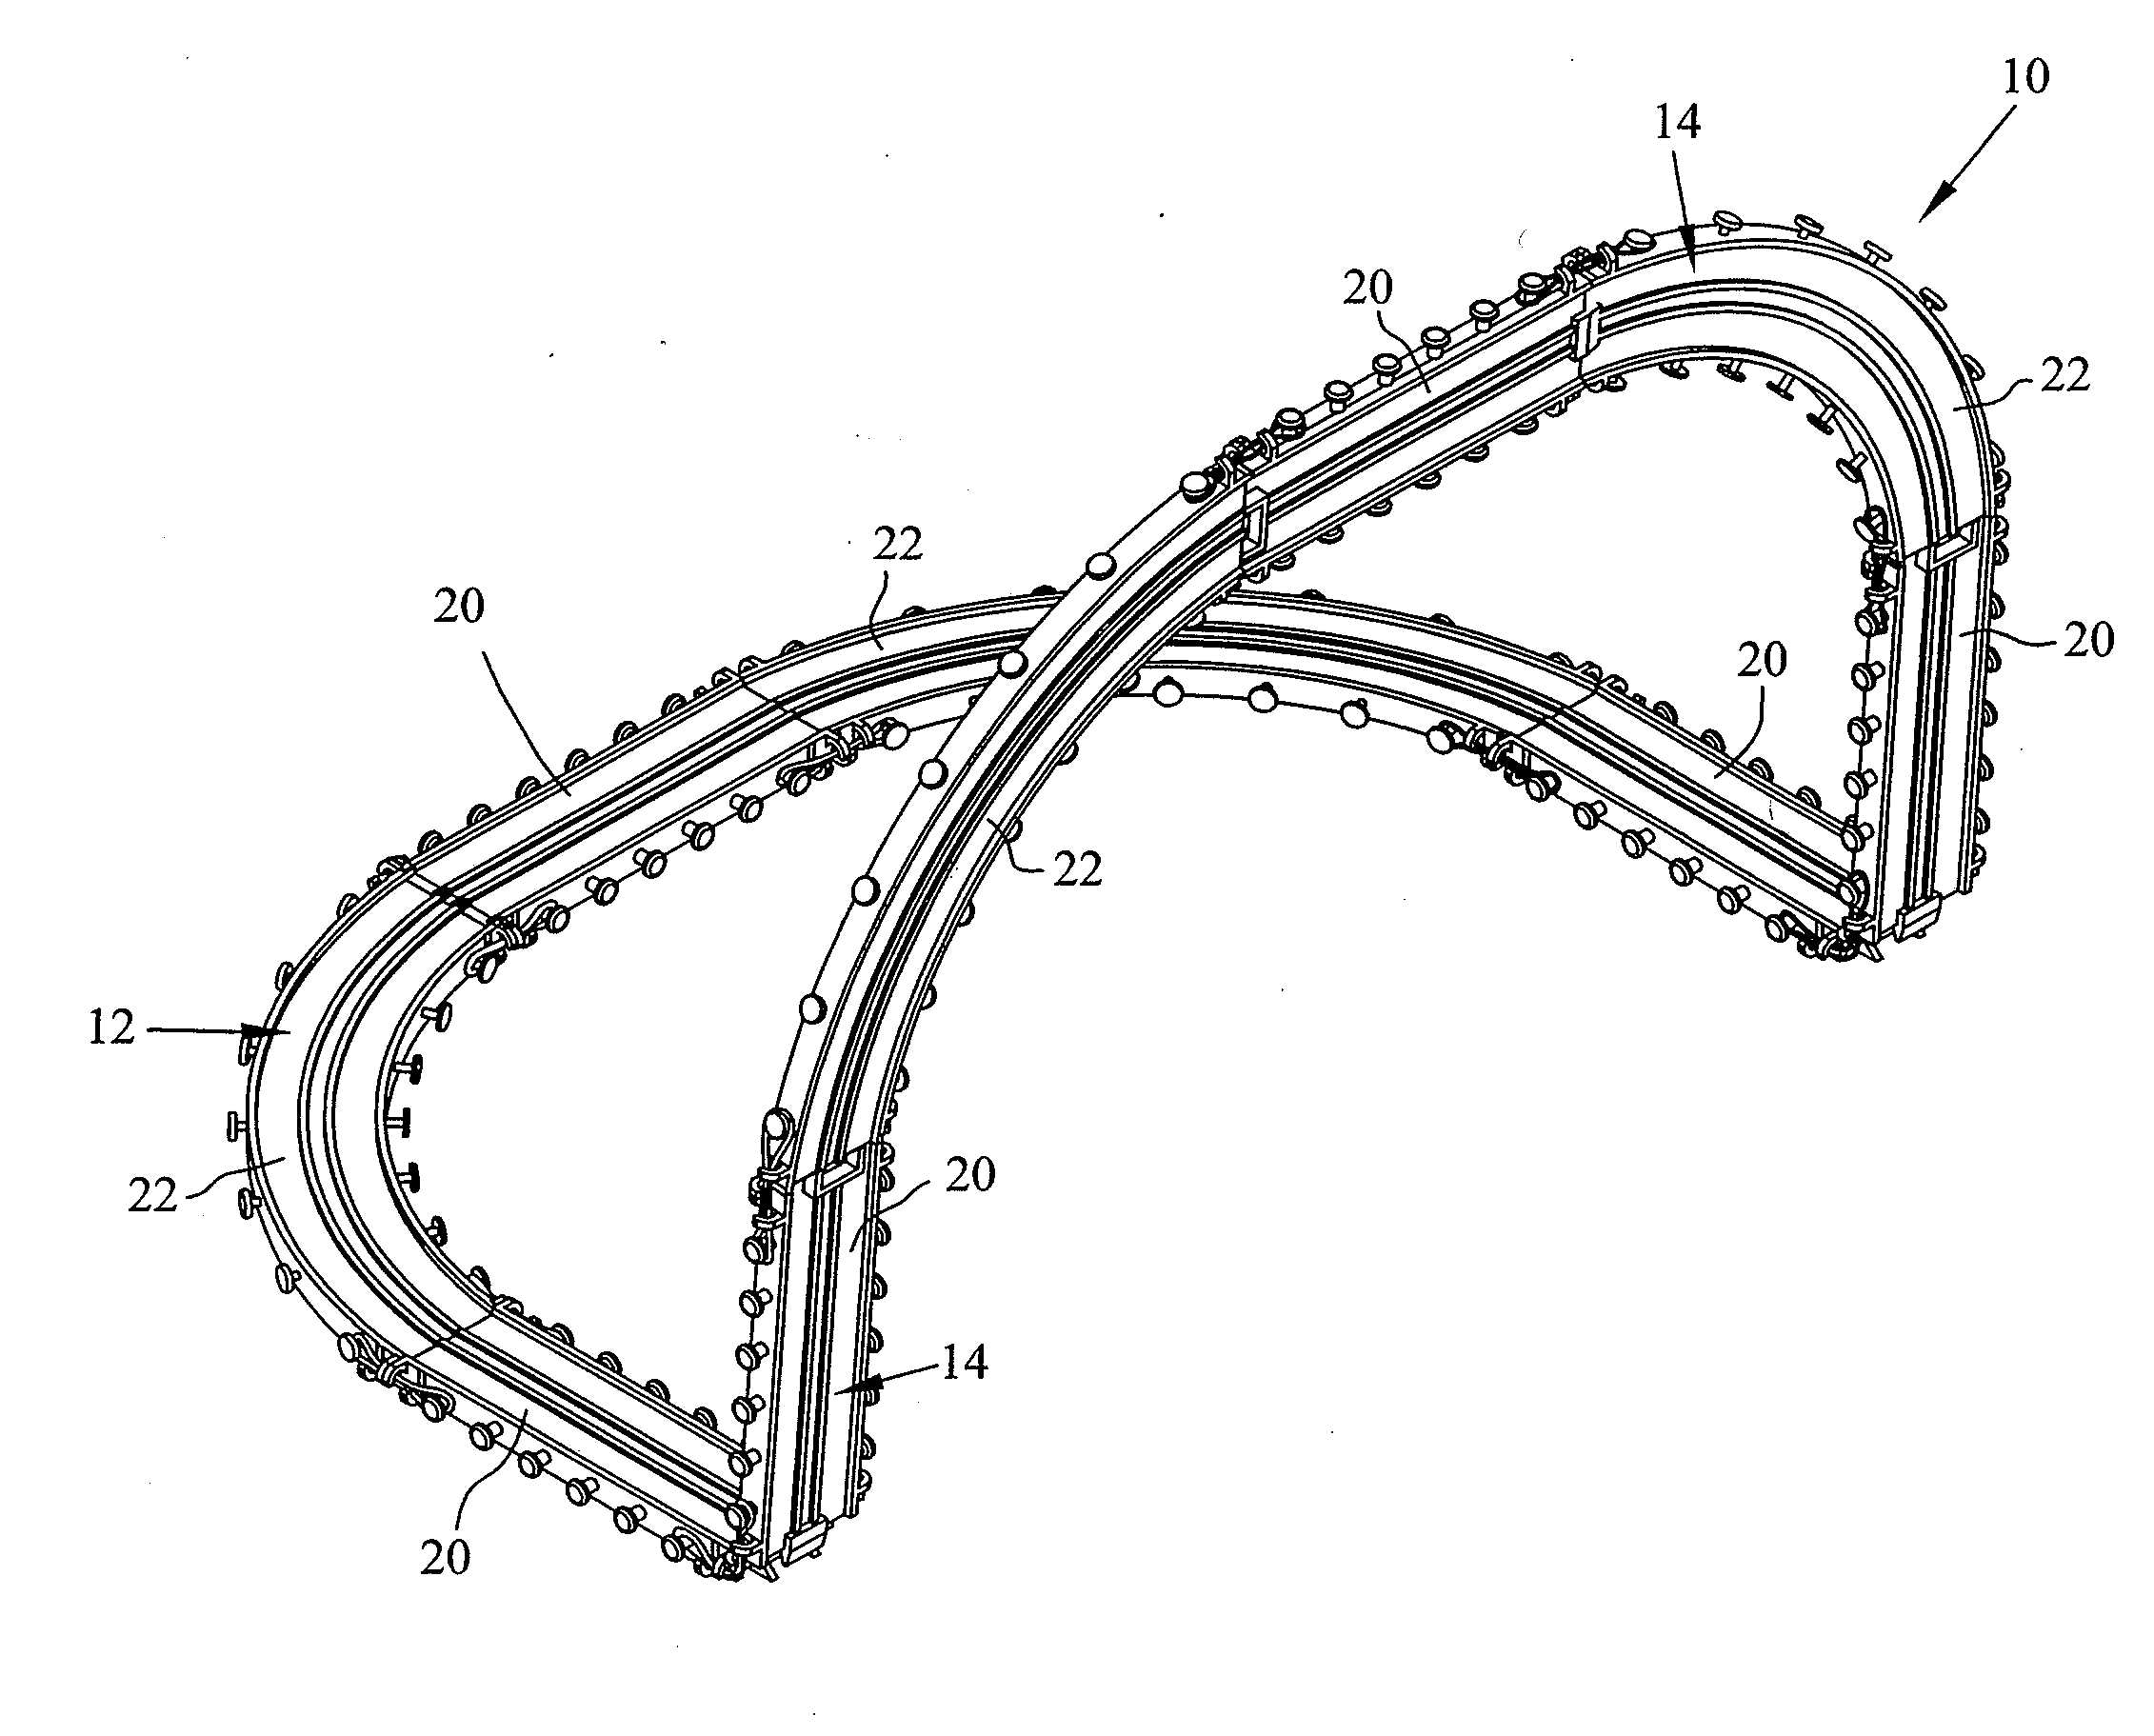 Track System for Toy Vehicles